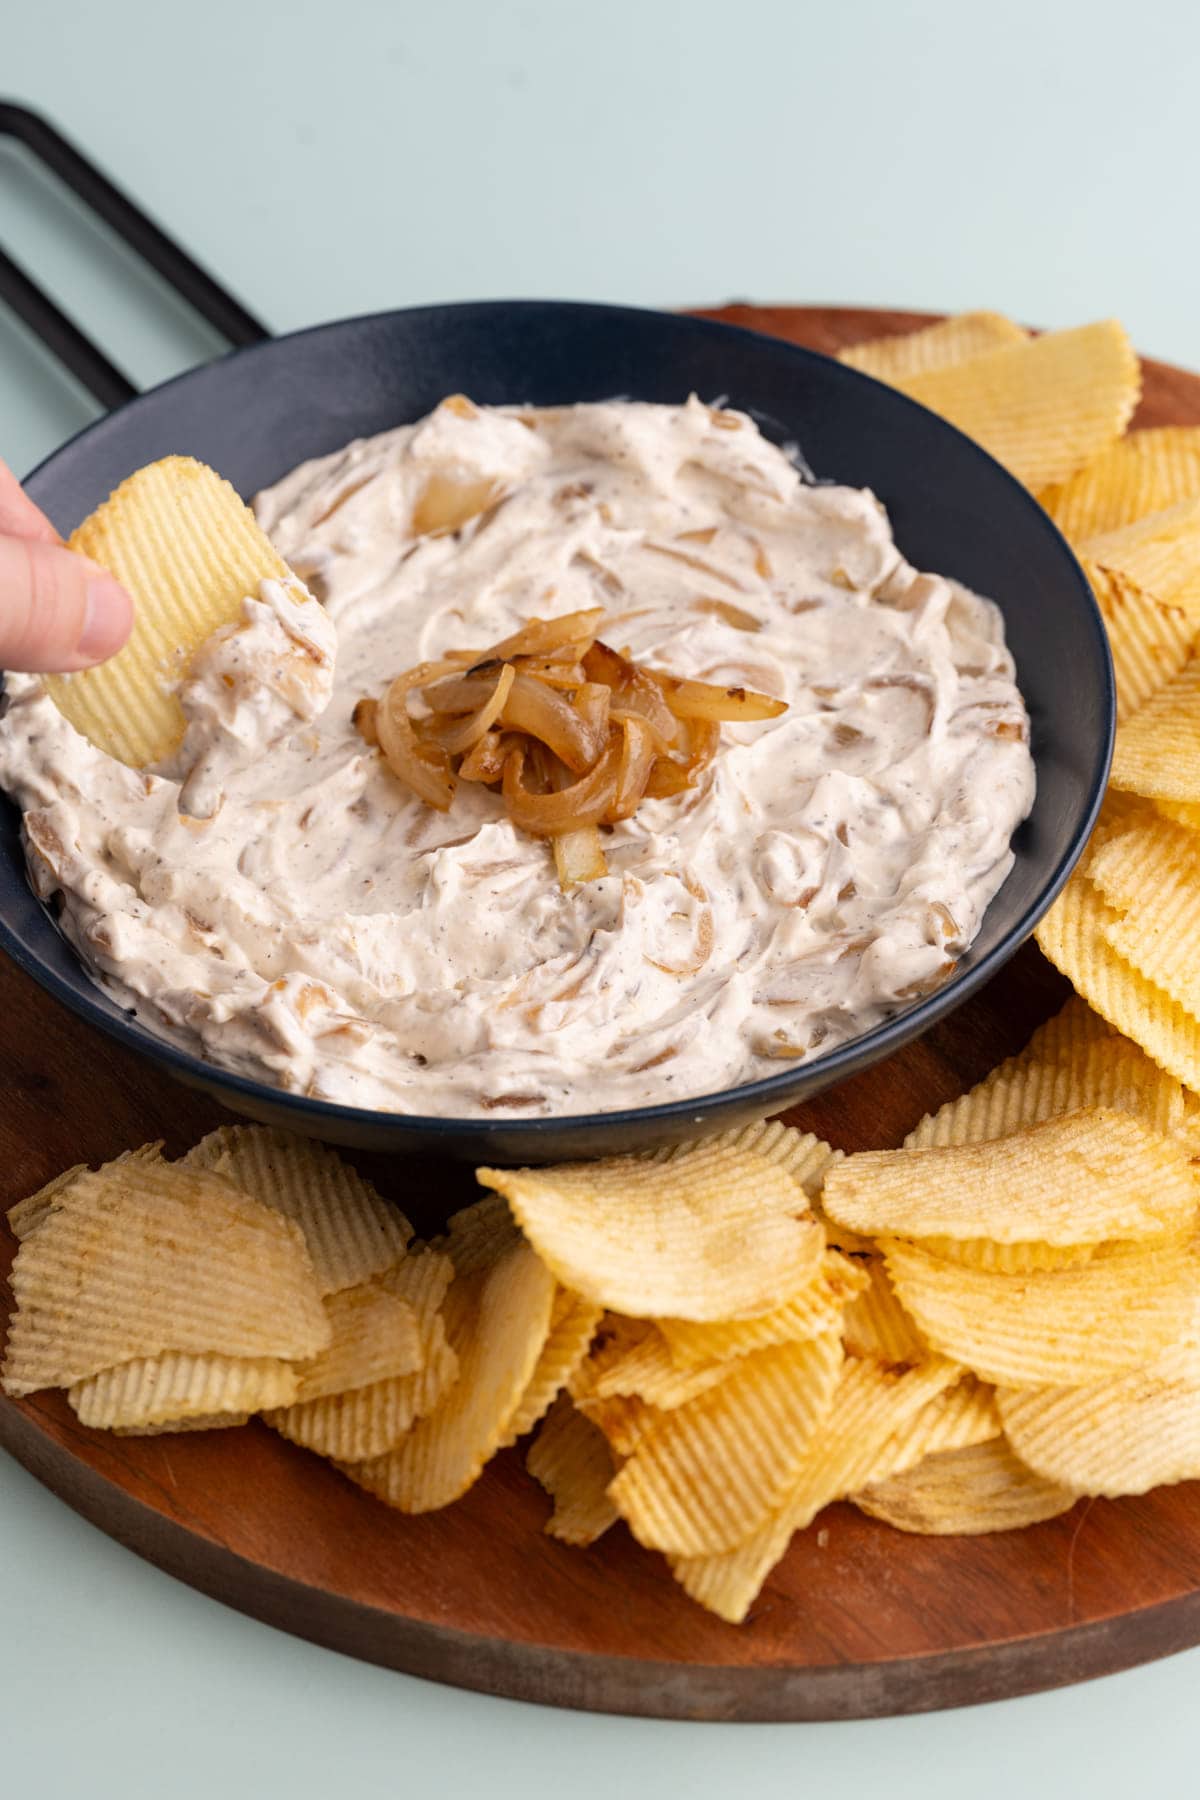 Dipping a chip into Caramelized Onion Dip